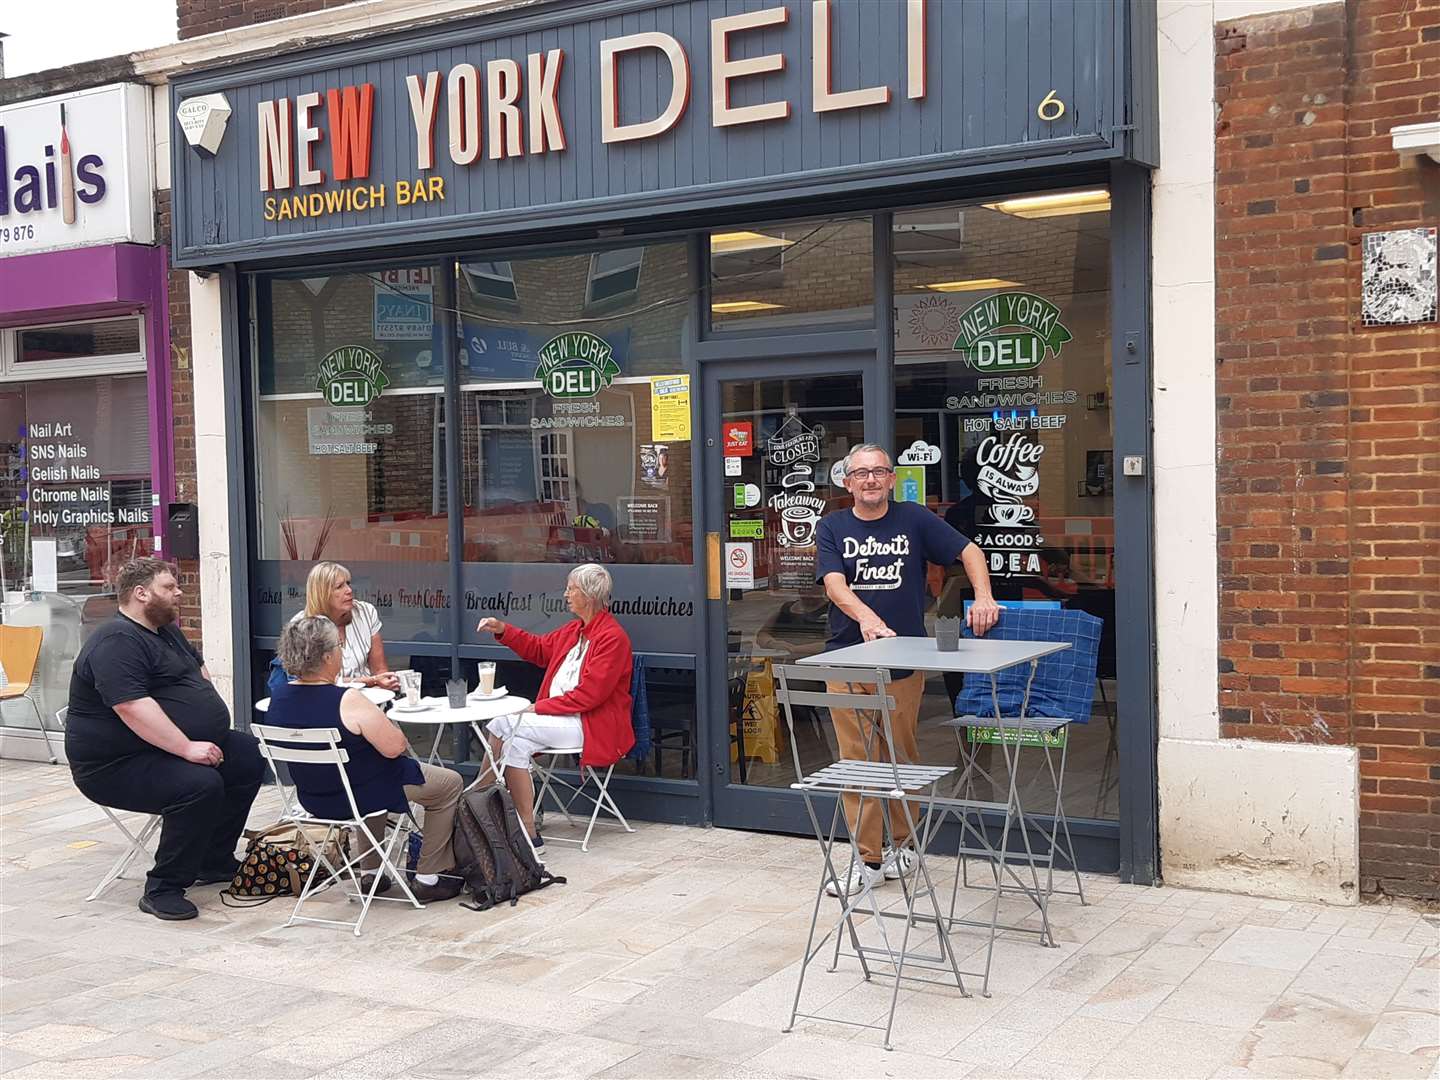 Matt Smith, co-owner of New York Deli, Dartford is hoping to see more people taking up their offers.